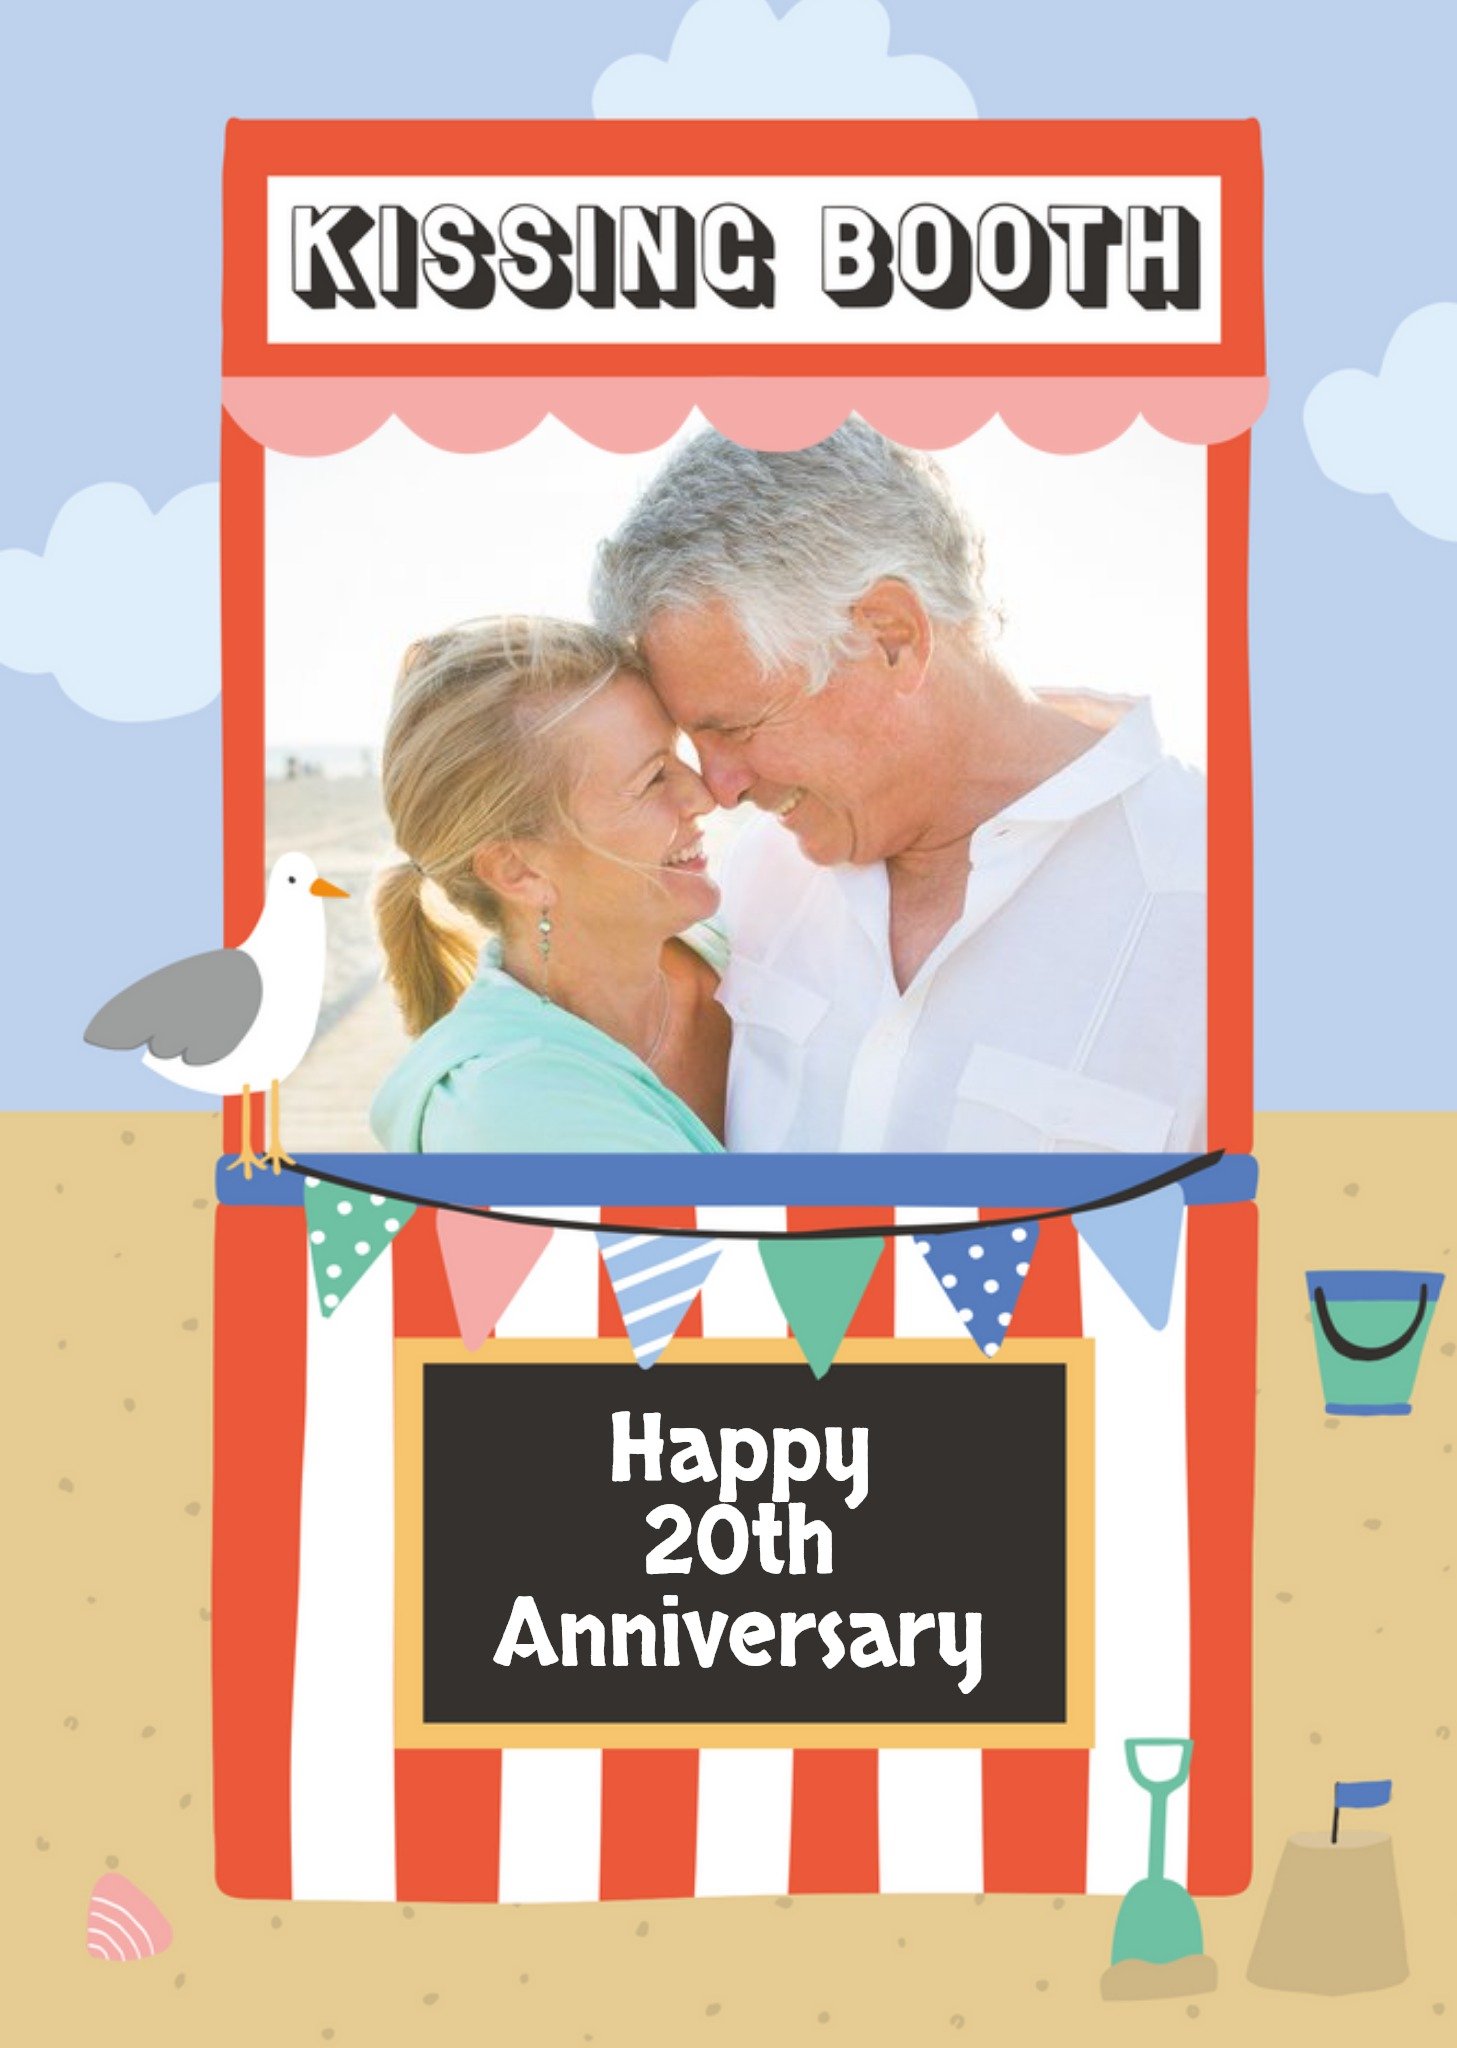 Moonpig Personalised Photo Illustrated Kissing Booth 20th Anniversary Card Ecard